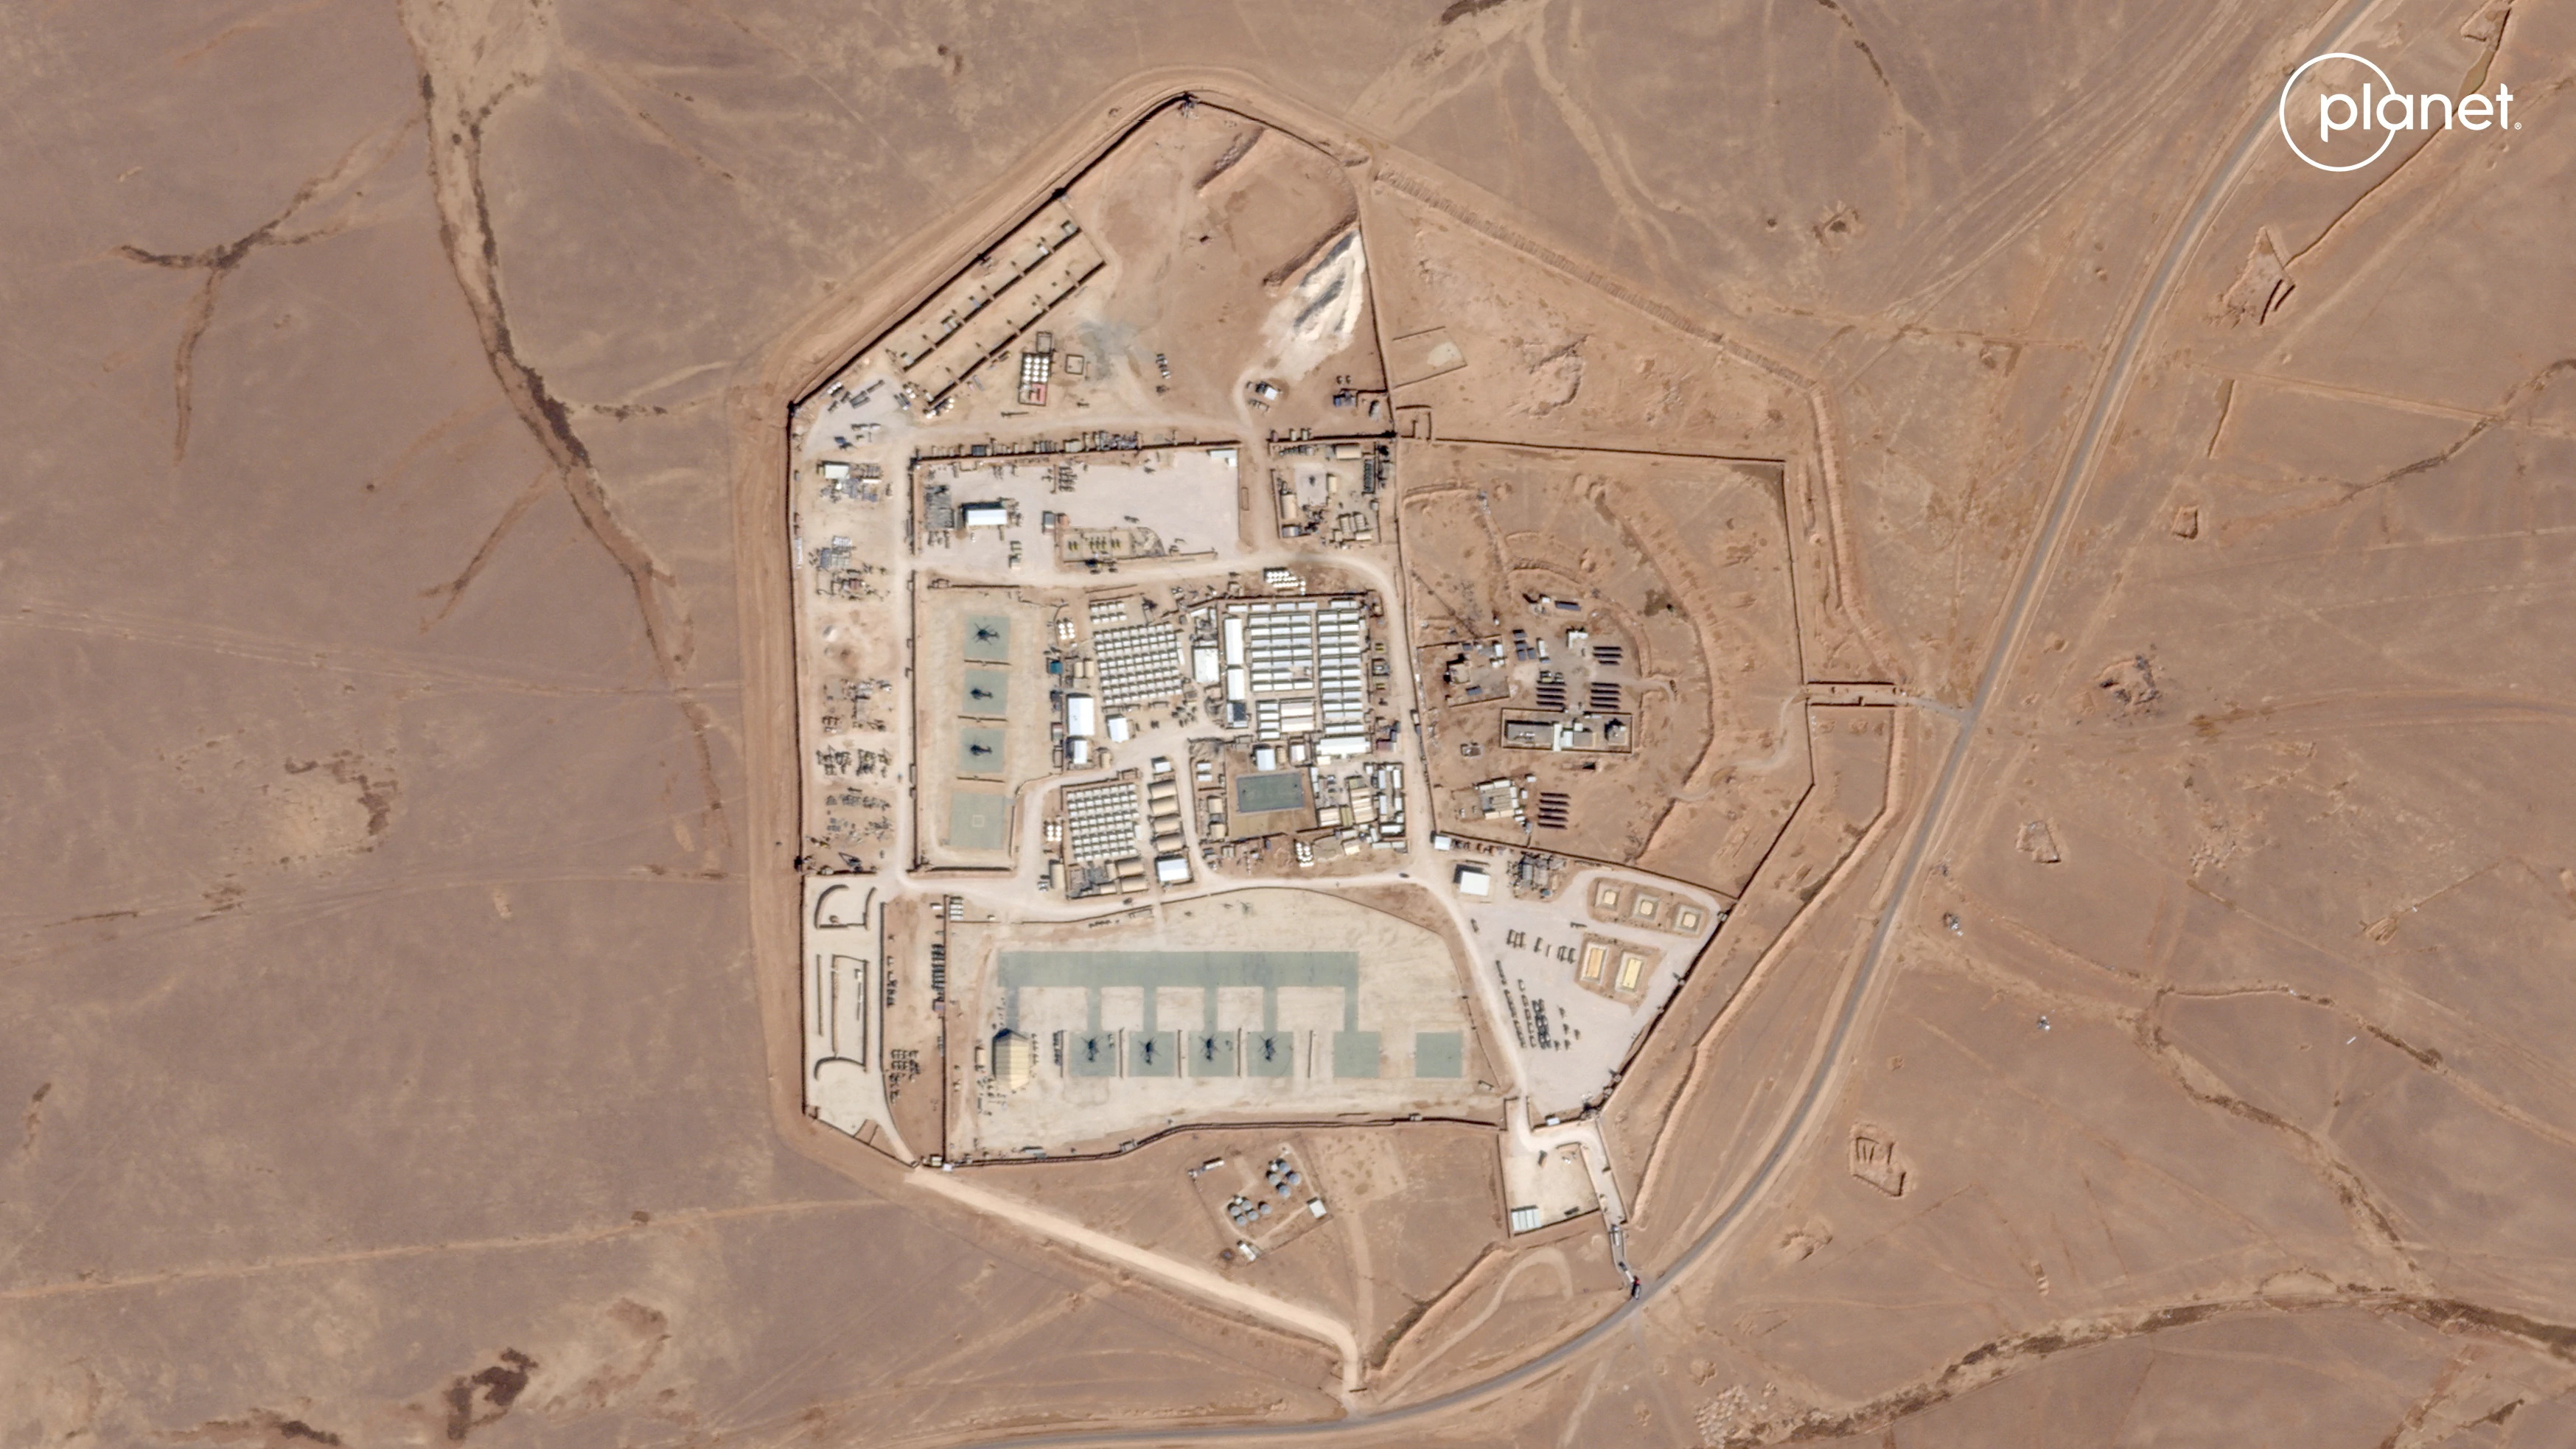 Satellite handout image of Tower 22 U.S. military outpost